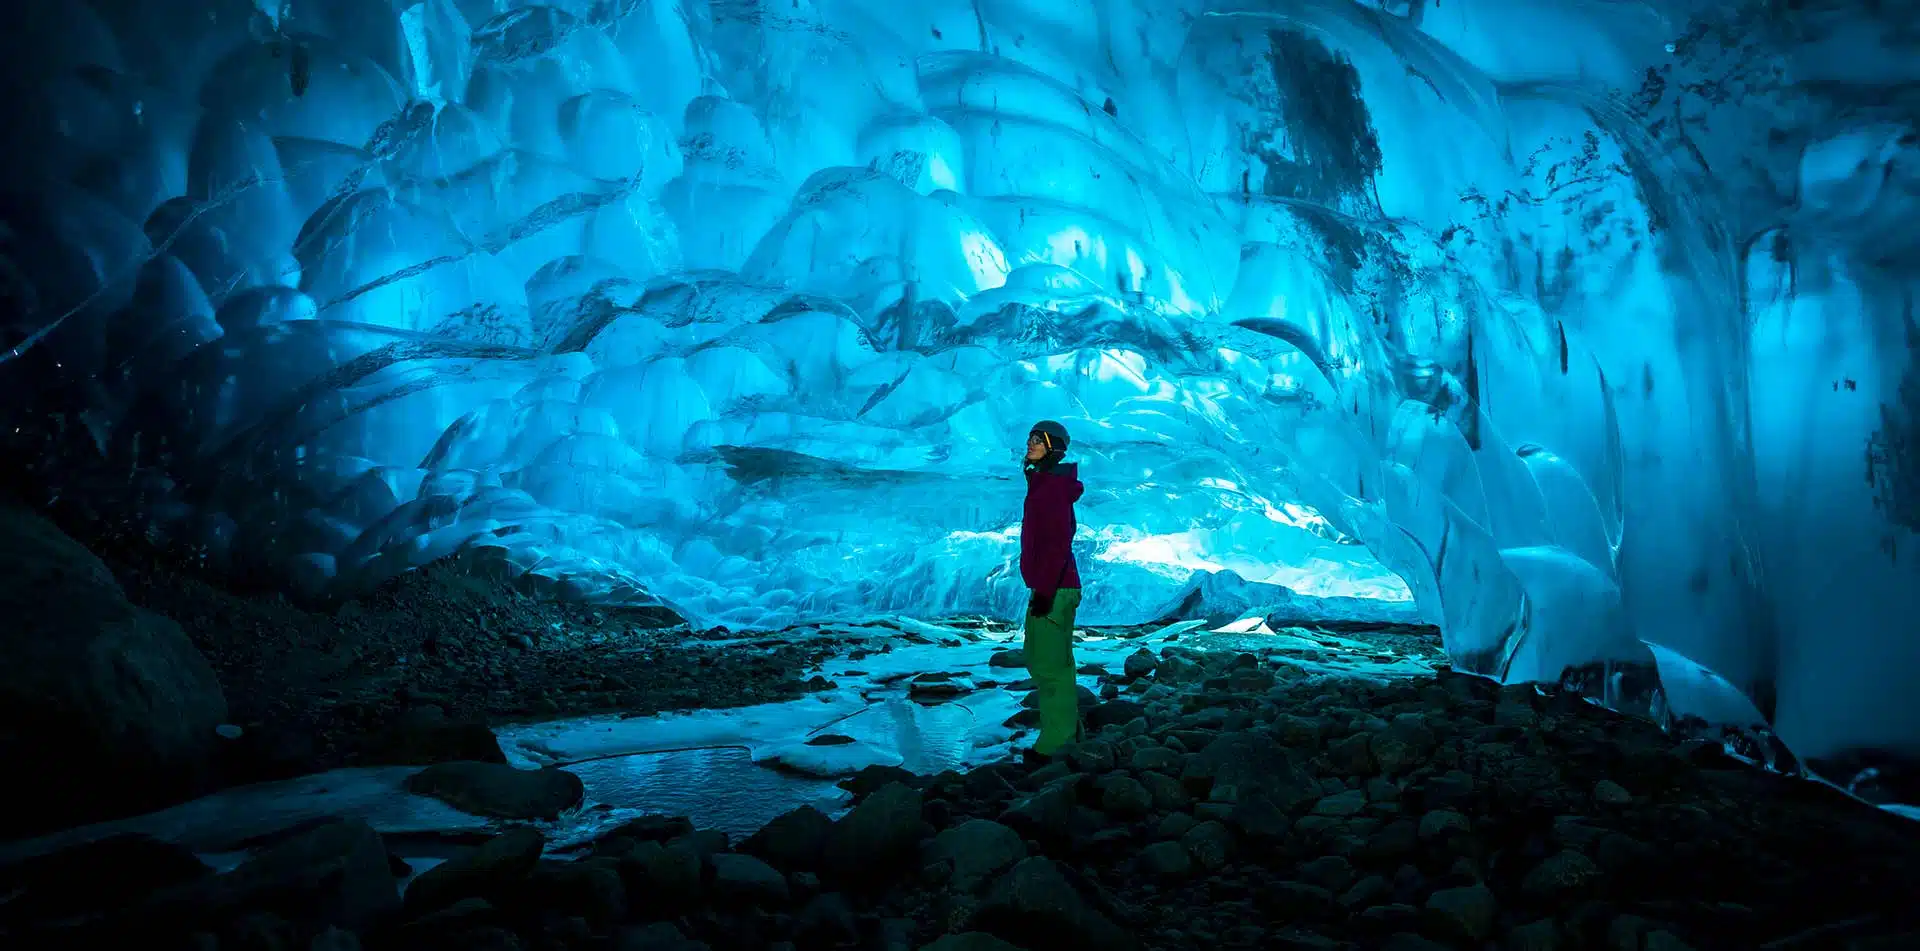 Exploring an ice cave in Iceland